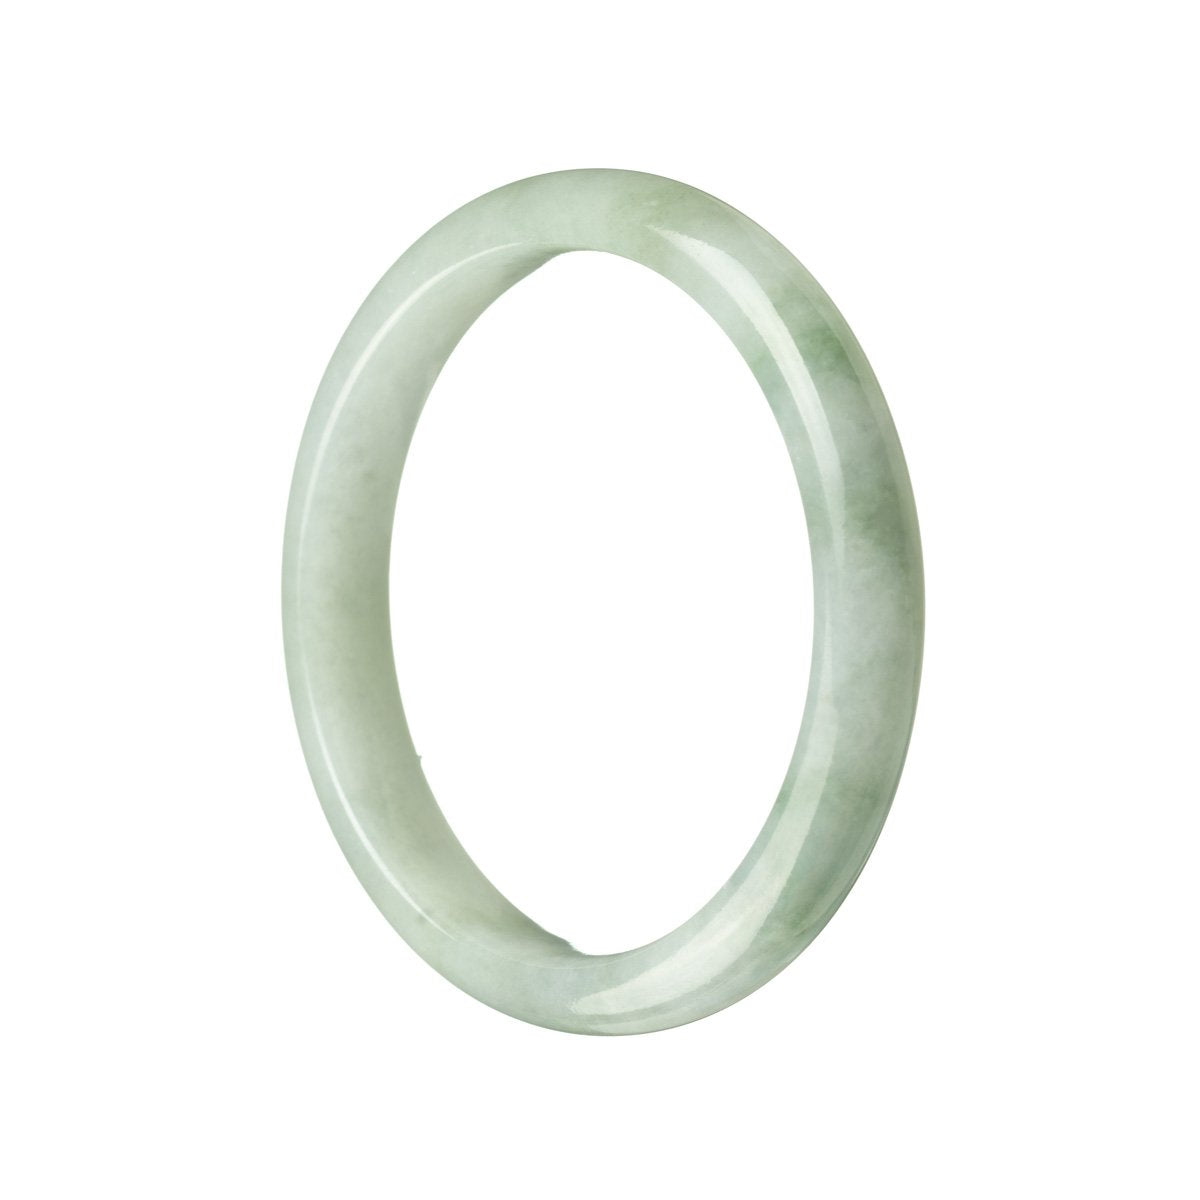 A close-up of a green grey traditional jade bangle bracelet, with a semi-round shape, measuring 55mm. This elegant and timeless piece is a must-have for any jewelry collection.